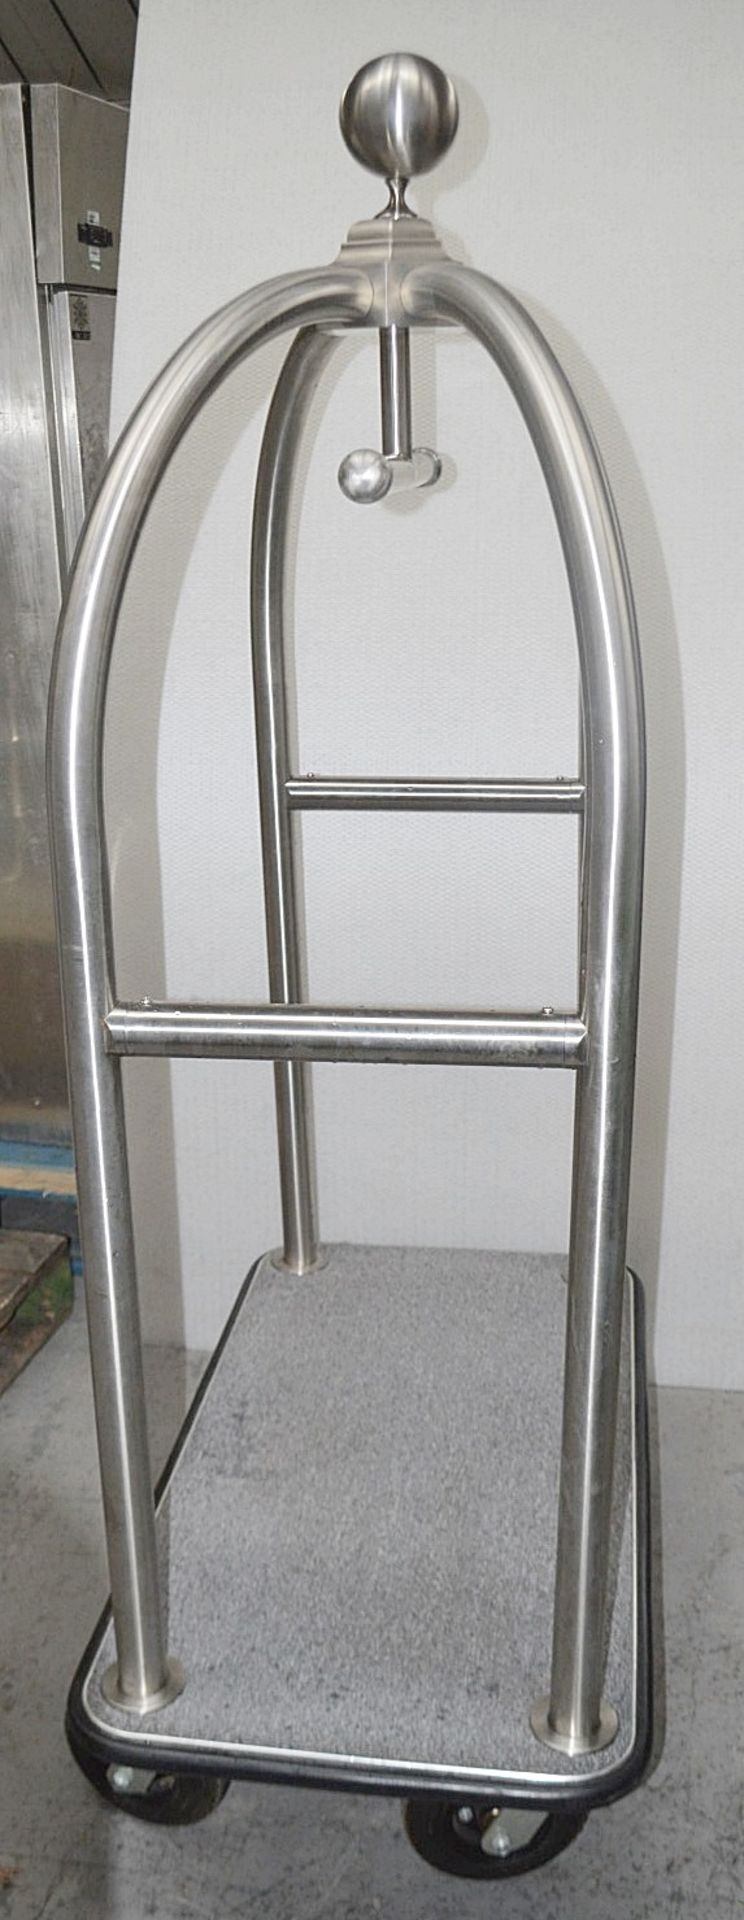 1 x Bolero Commercial Hotel Lobby Luggage Trolley Cart In Brushed Stainless Steel With Carpeted Base - Image 5 of 5